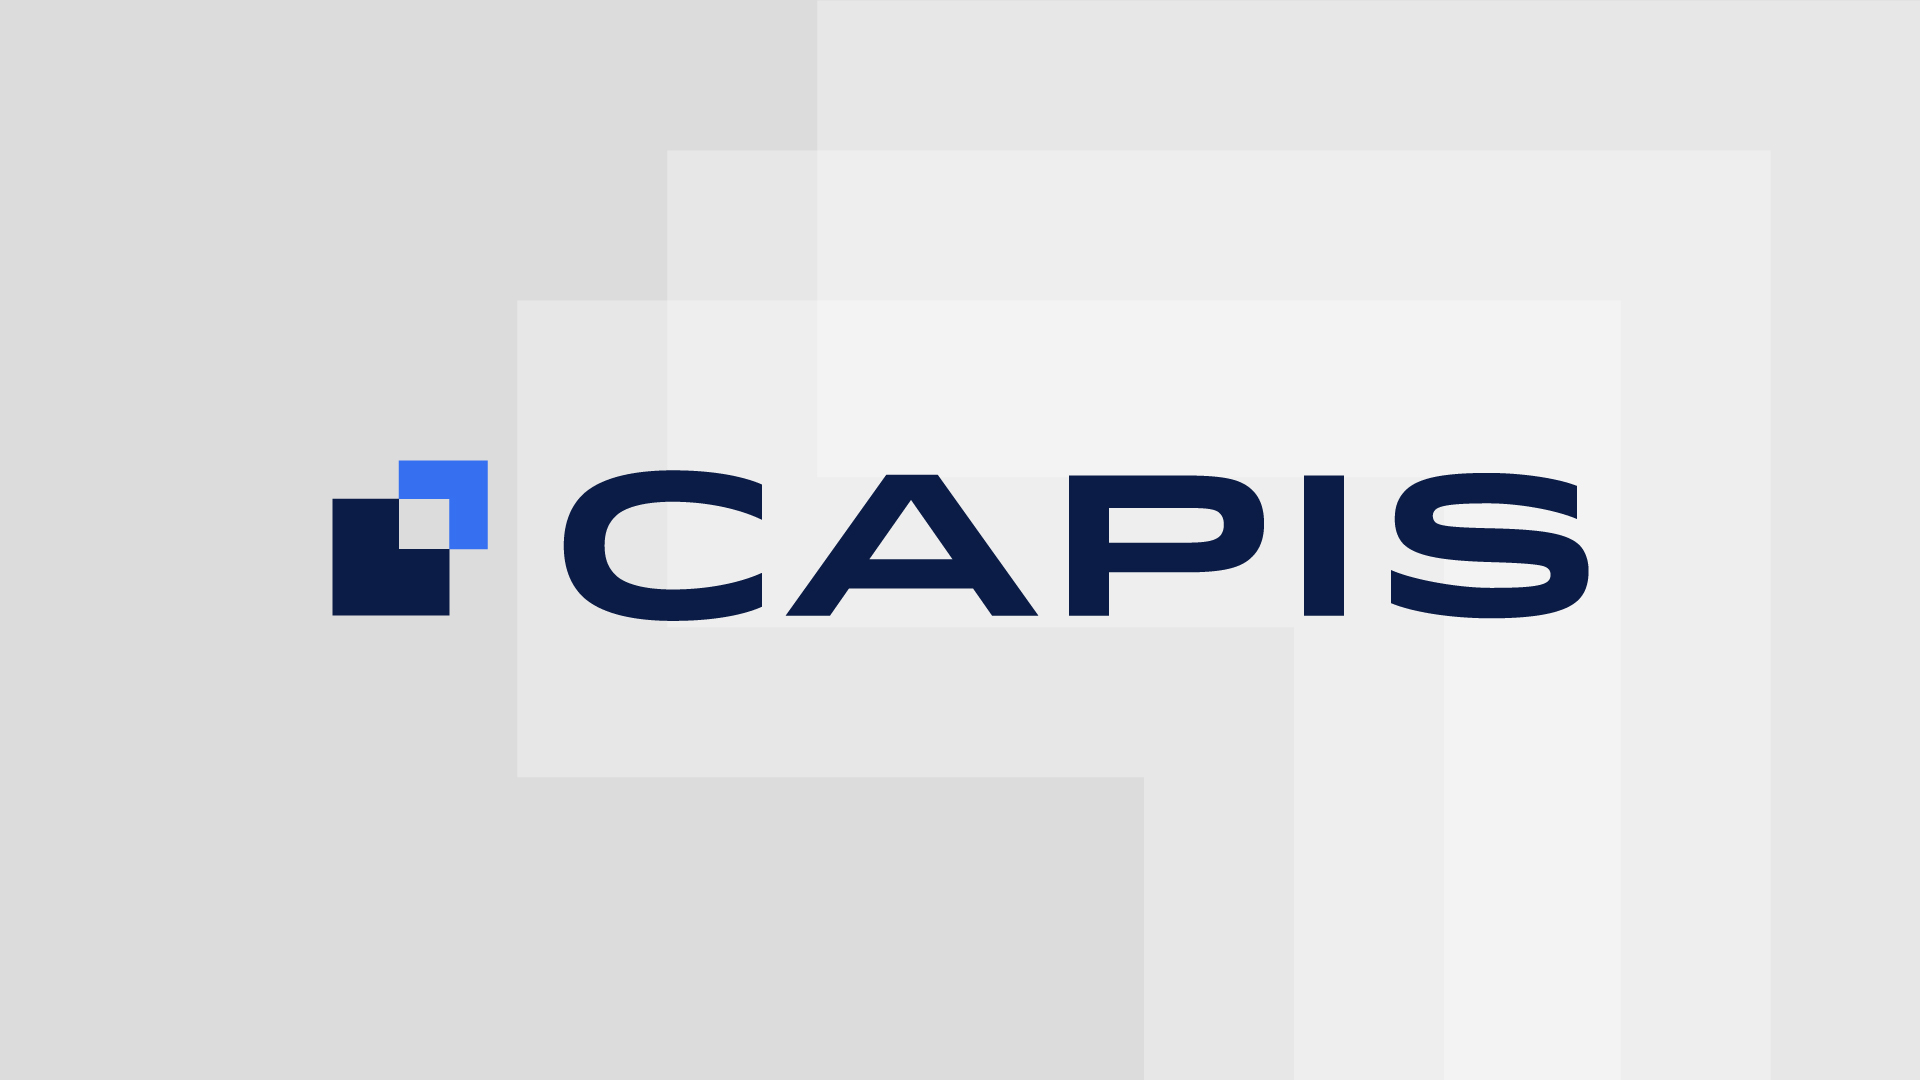 CAPIS | Trading. Transparency. Trust